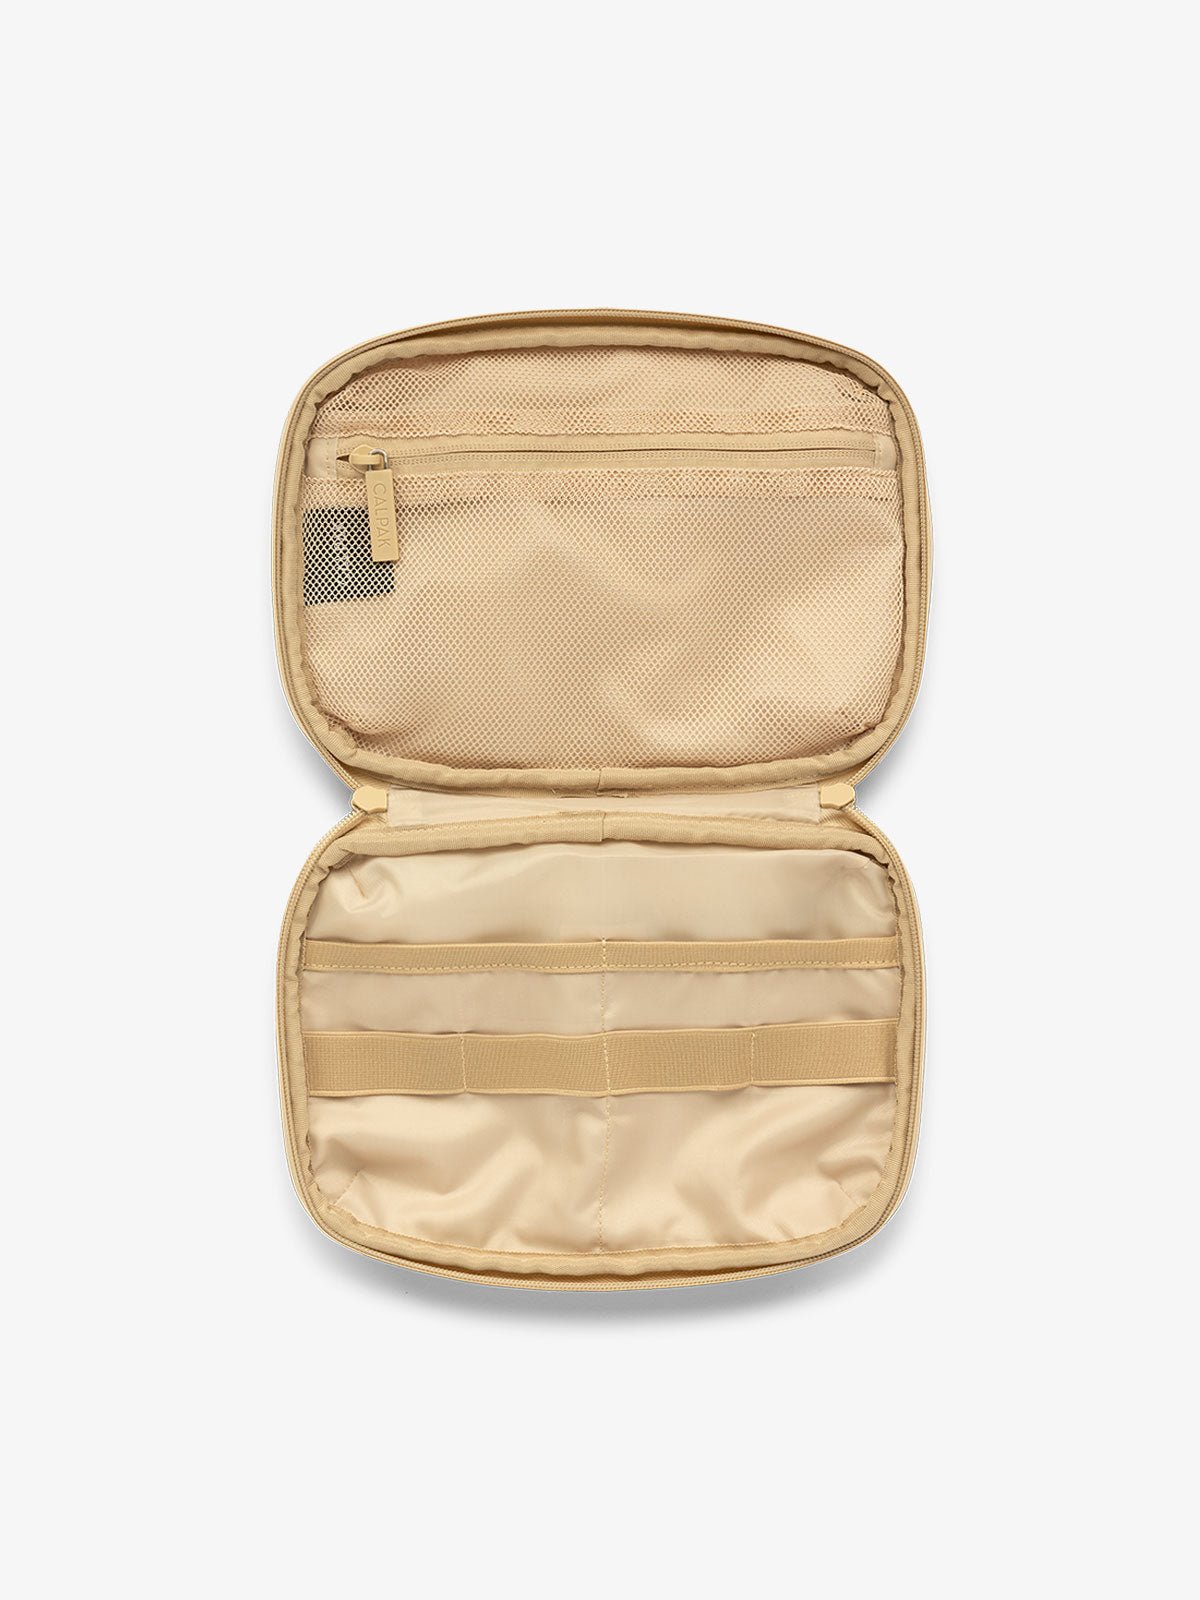 Interior view of tablet organizer in oatmeal beige with loops and zippered pockets for organizing electronics and belongings